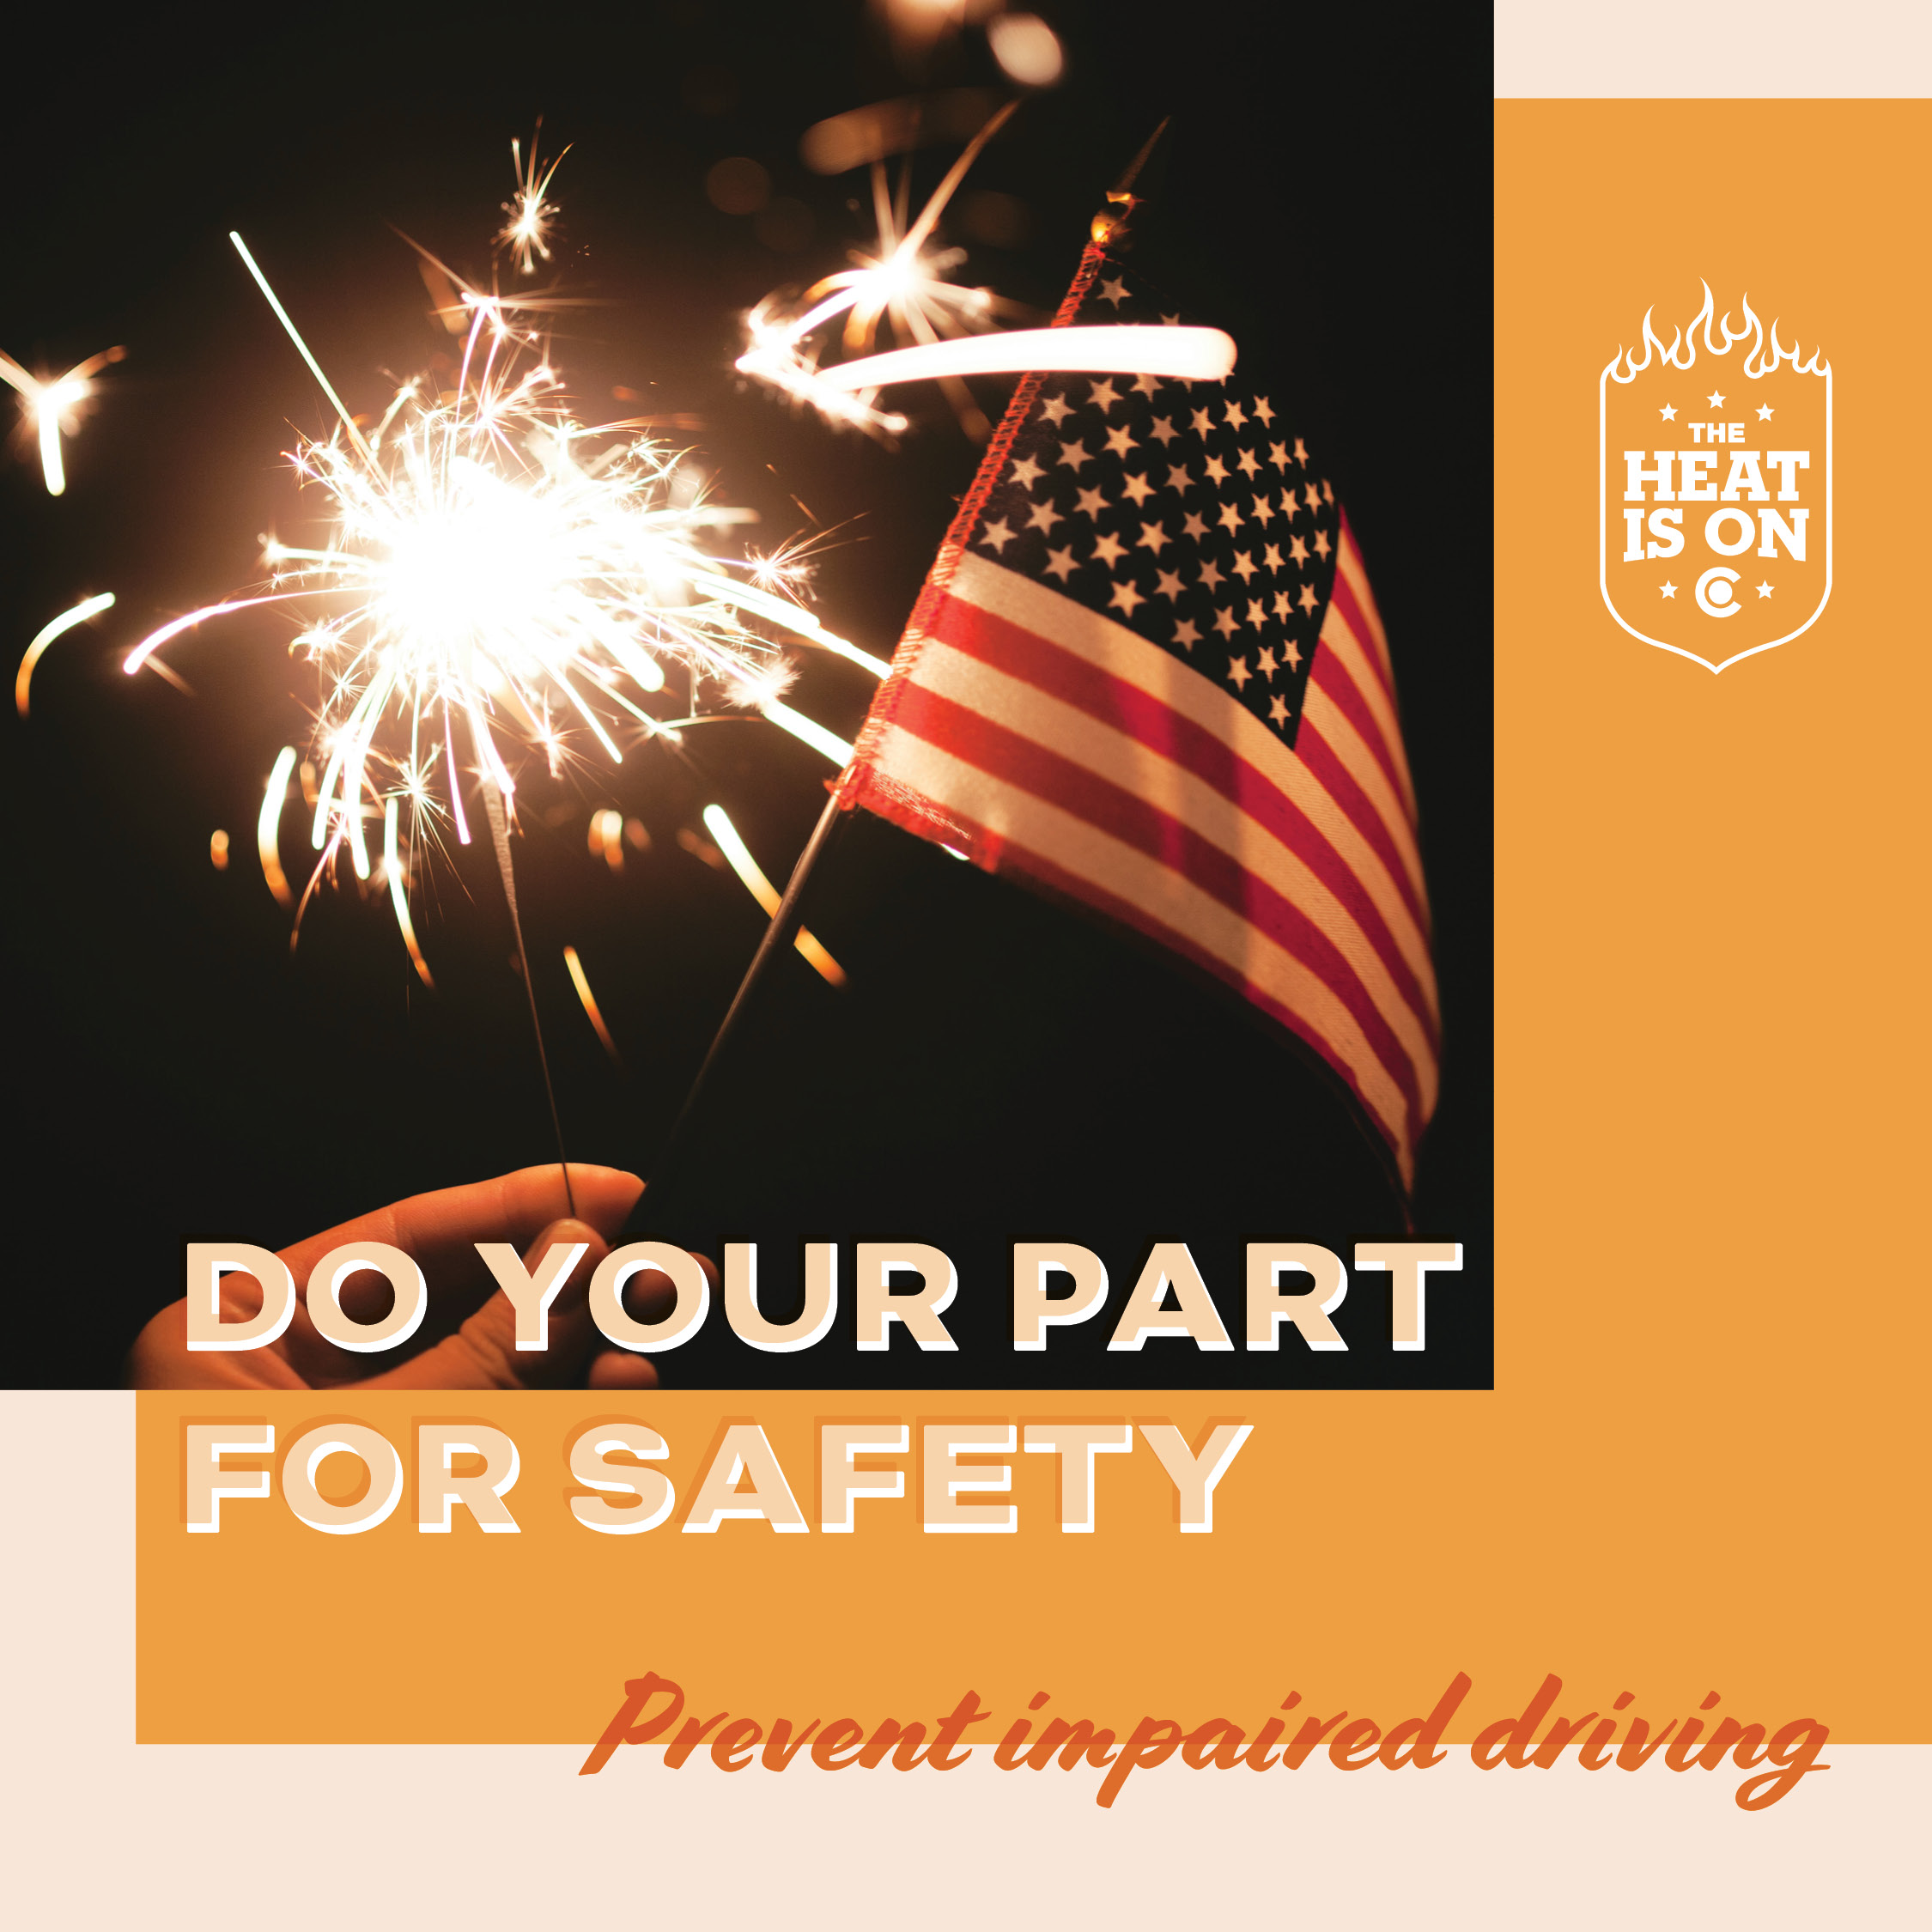 American flag and sparklers illuminate an orange graphic image promoting The Heat Is On enforcement period, text overlay reads “Do your part for safety. Prevent impaired driving.”